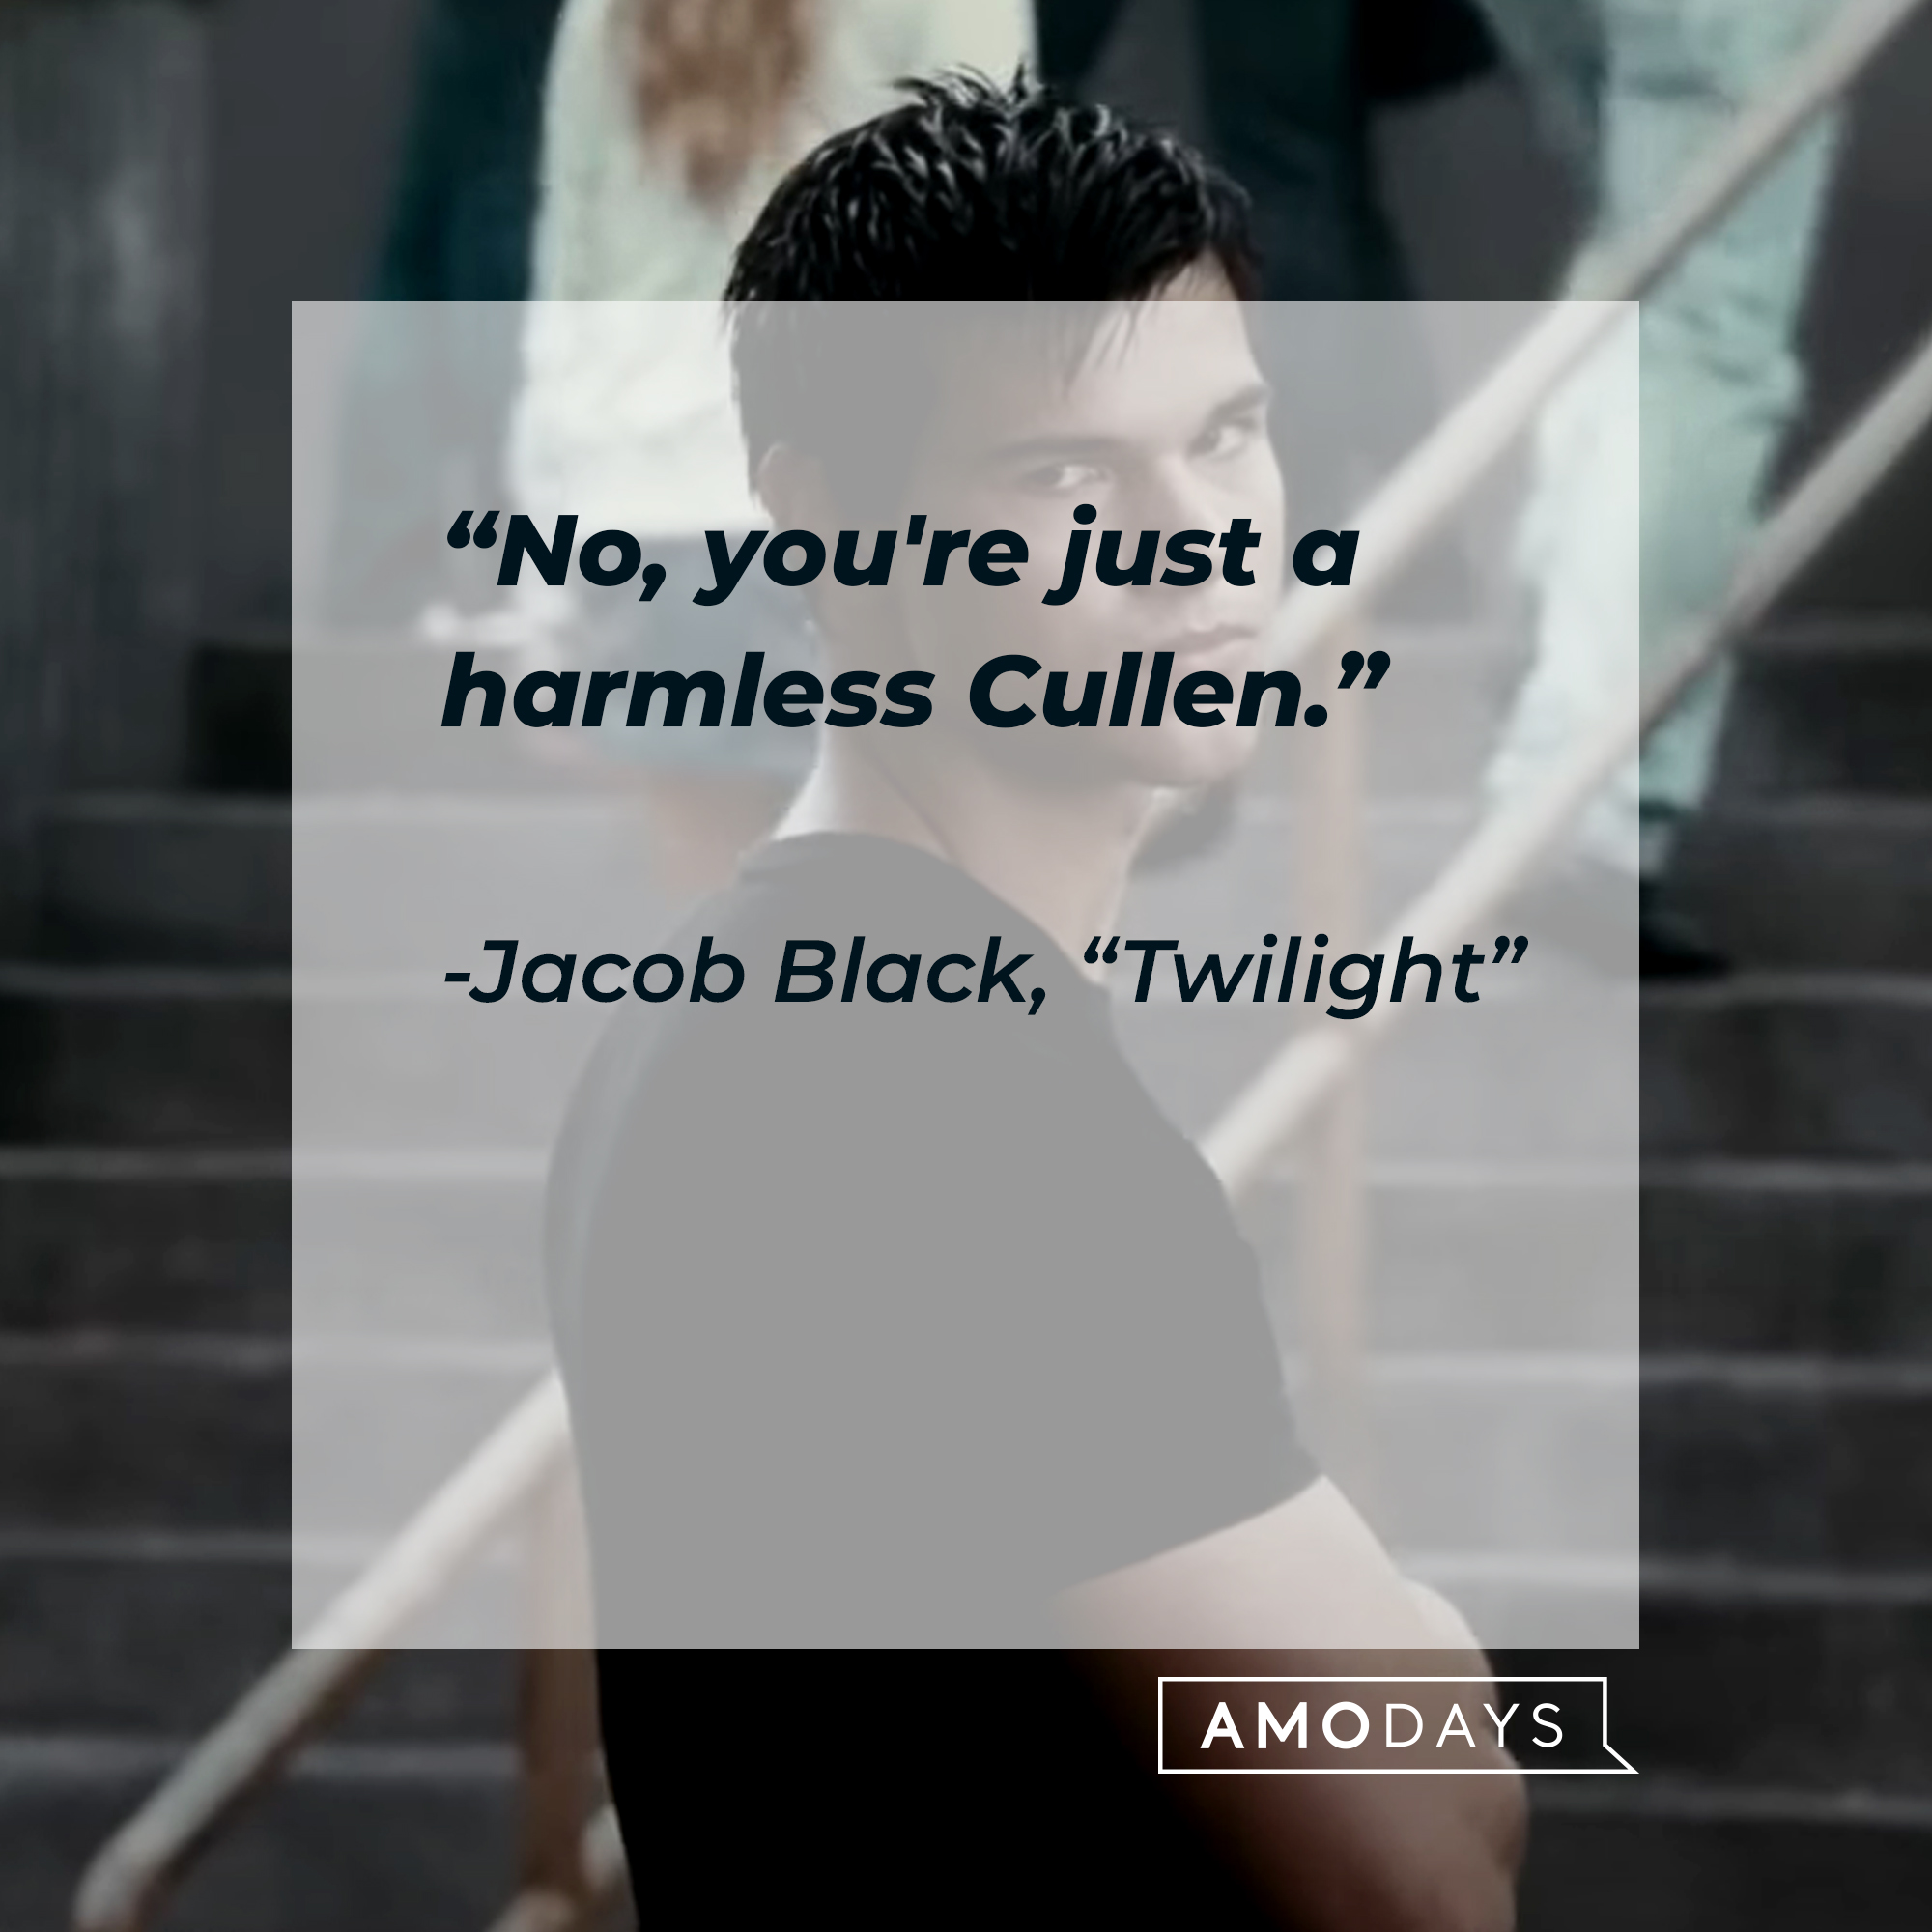 Image of Jacob Black with his quote in "Twilight:" "No, you're just a harmless Cullen.” | Source: Facebook.com/twilight